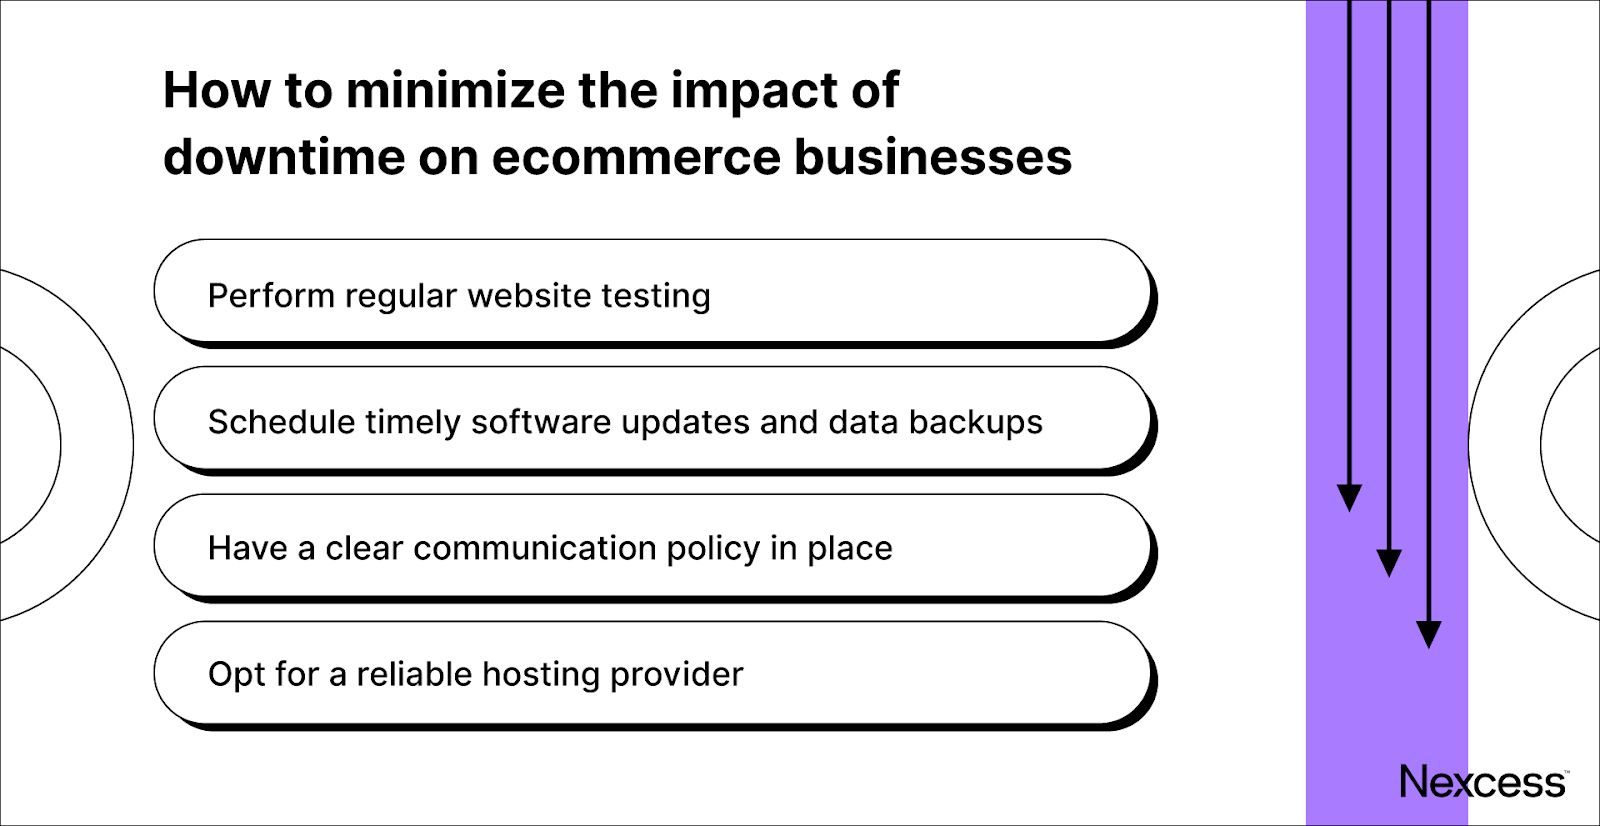 Ways to minimize the impact of ecommerce downtime.